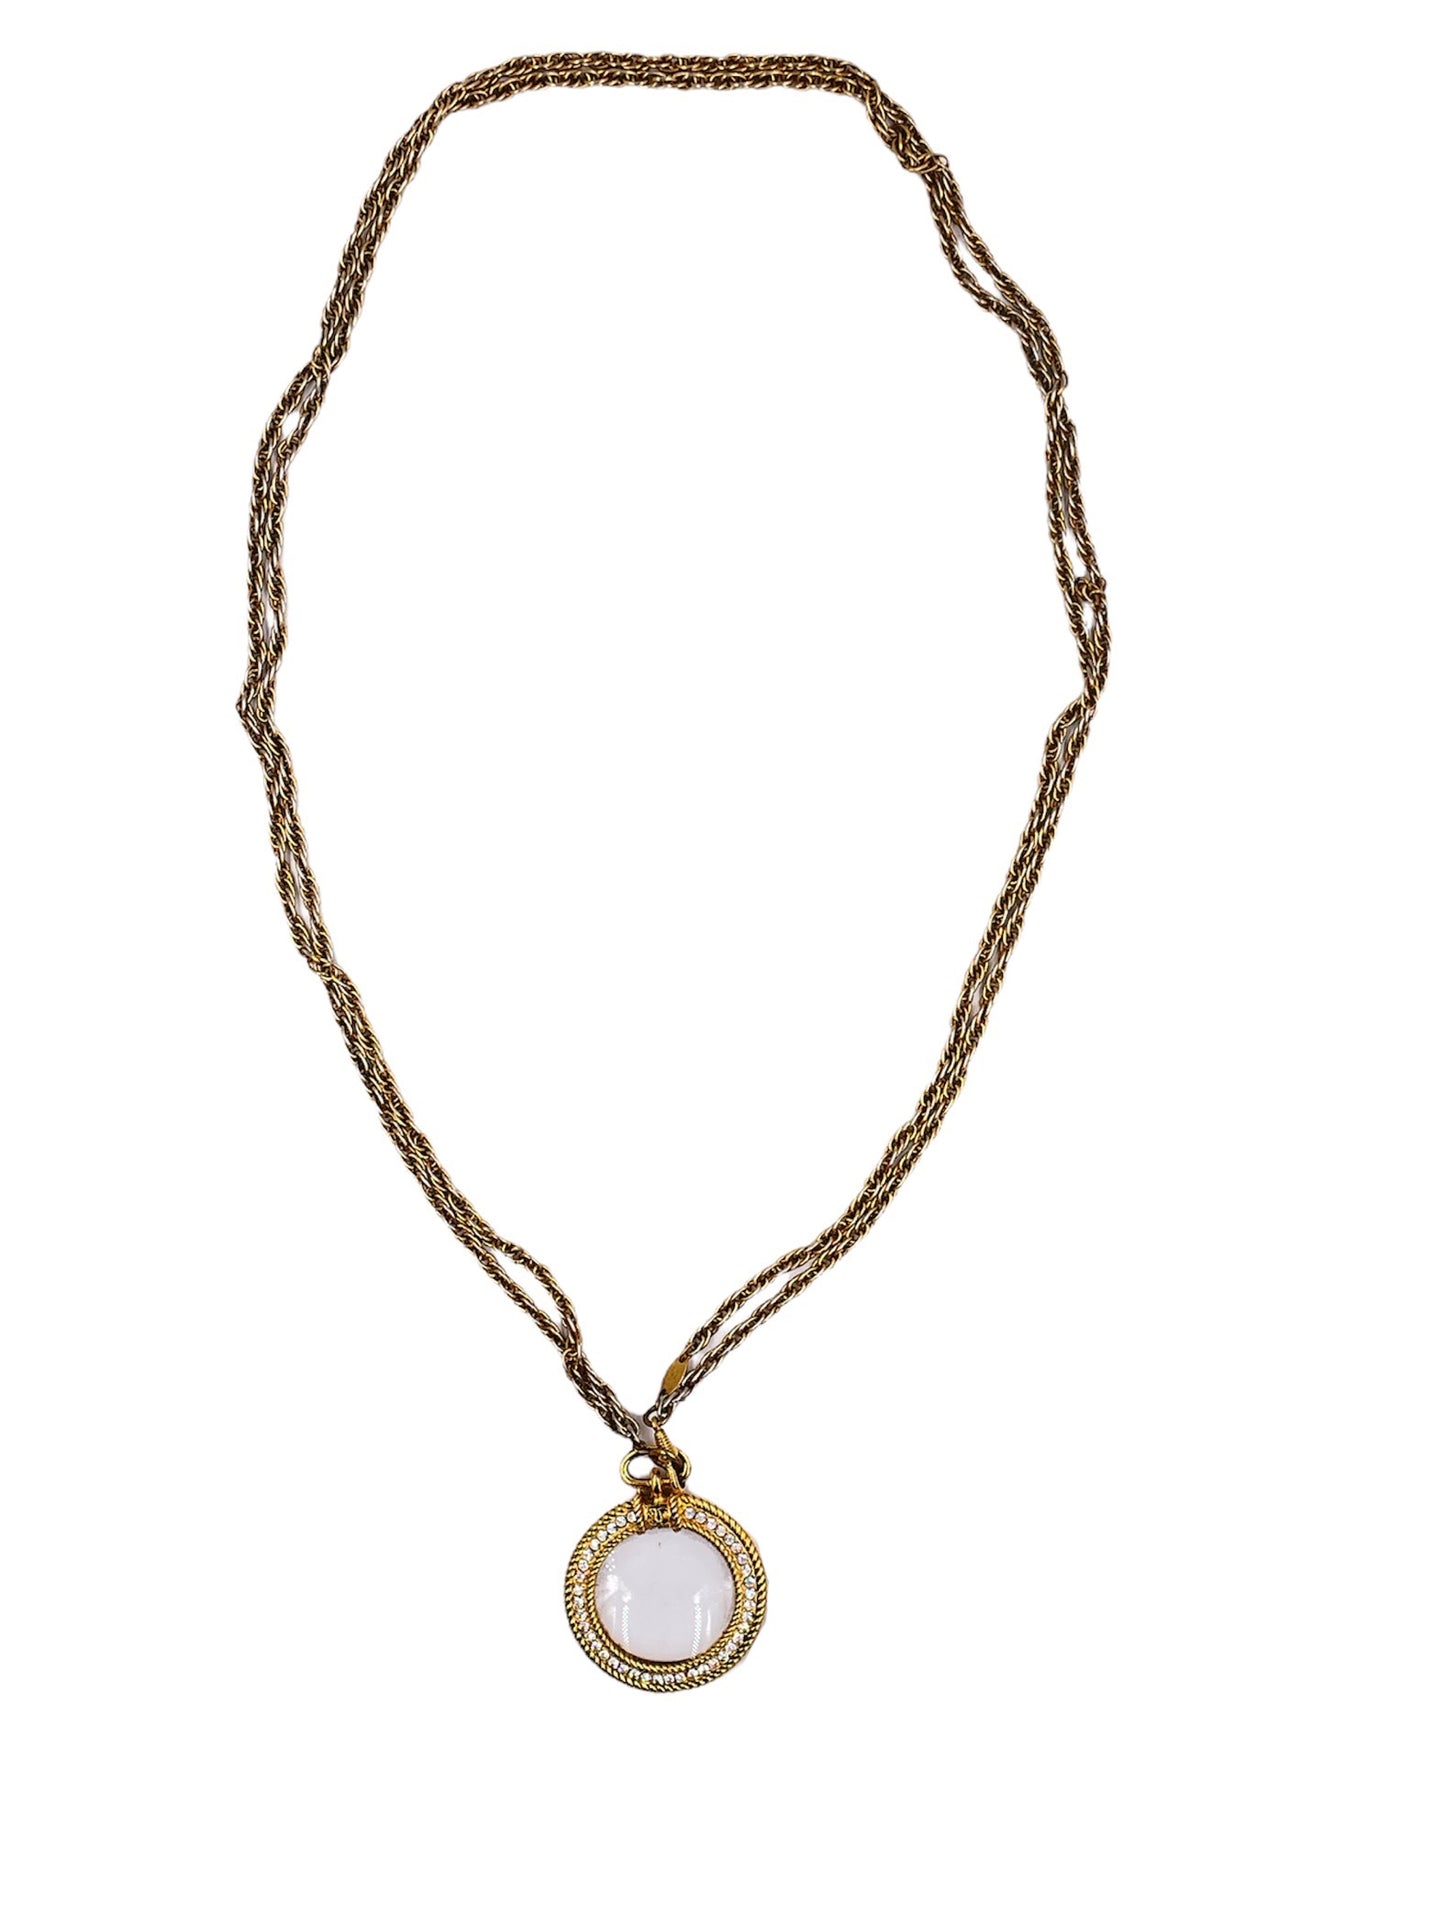 Chanel 1984 Magnifying glass necklace